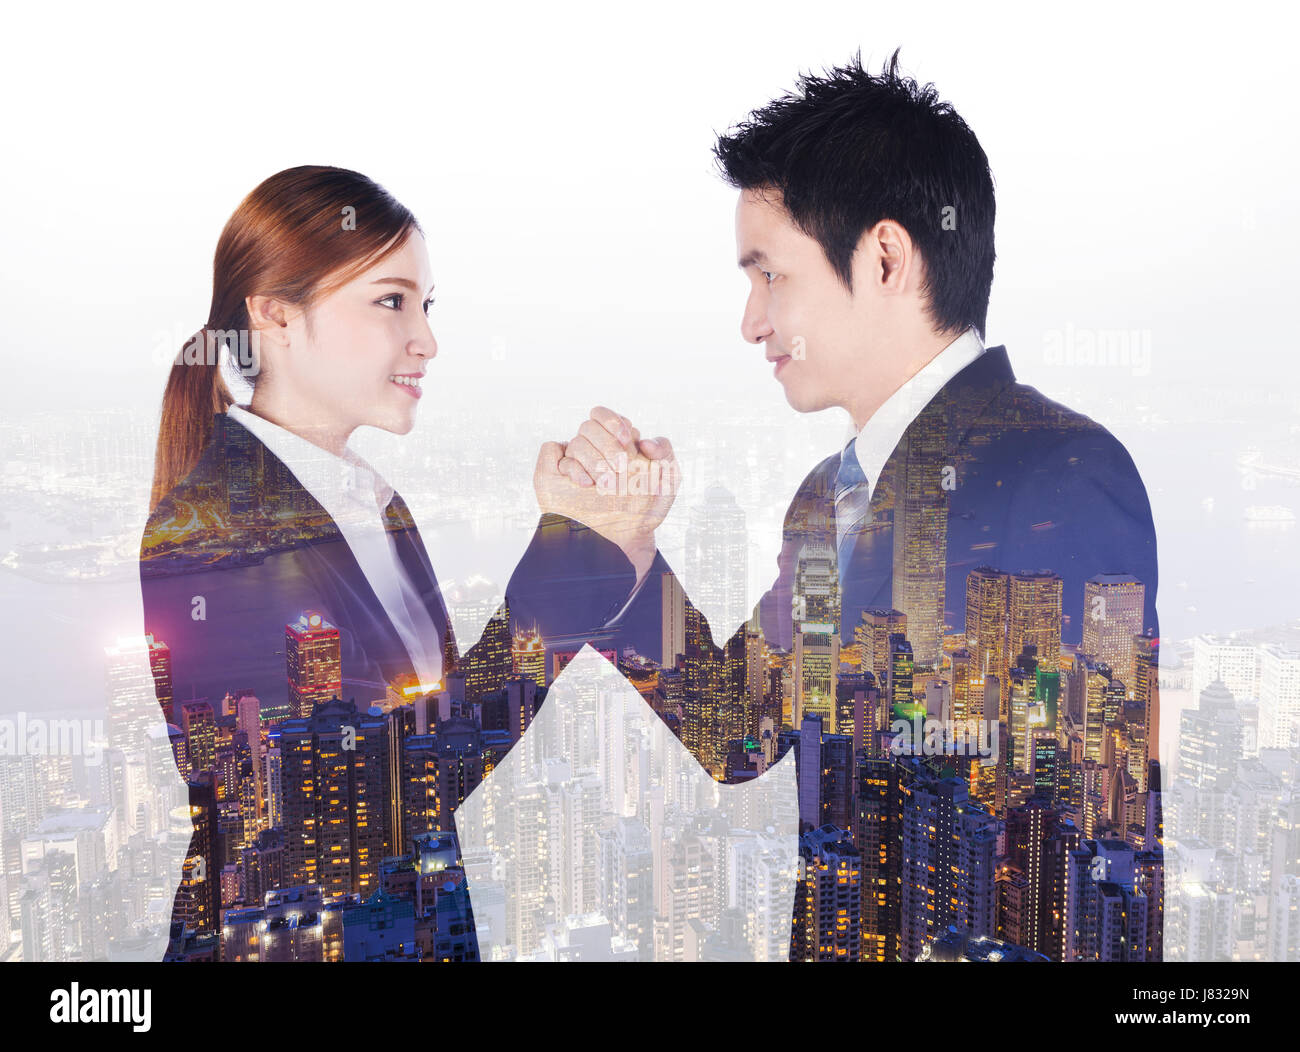 double exposure of arm wrestling between businessman and businesswoman with a city background Stock Photo